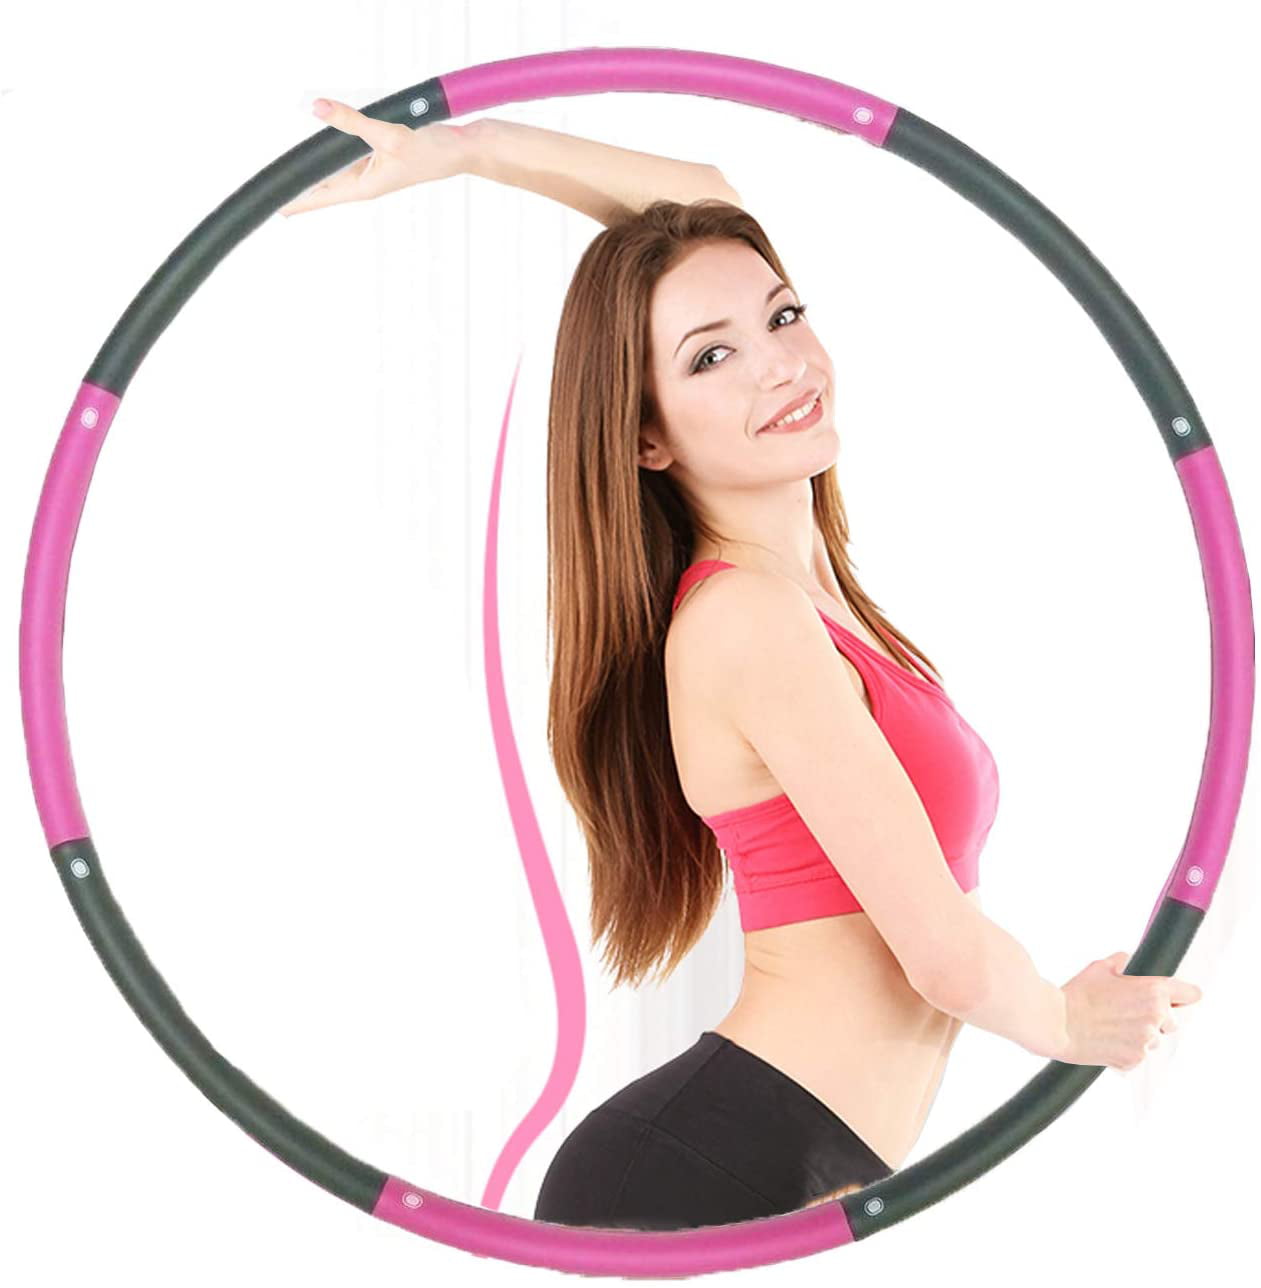 VANBAR Hoola Hoop for Exercise 8-Section Detachable Professional Wavy Design Fitness Hoola Hoop for Child Adults Weighted Hula Hoops for Adults